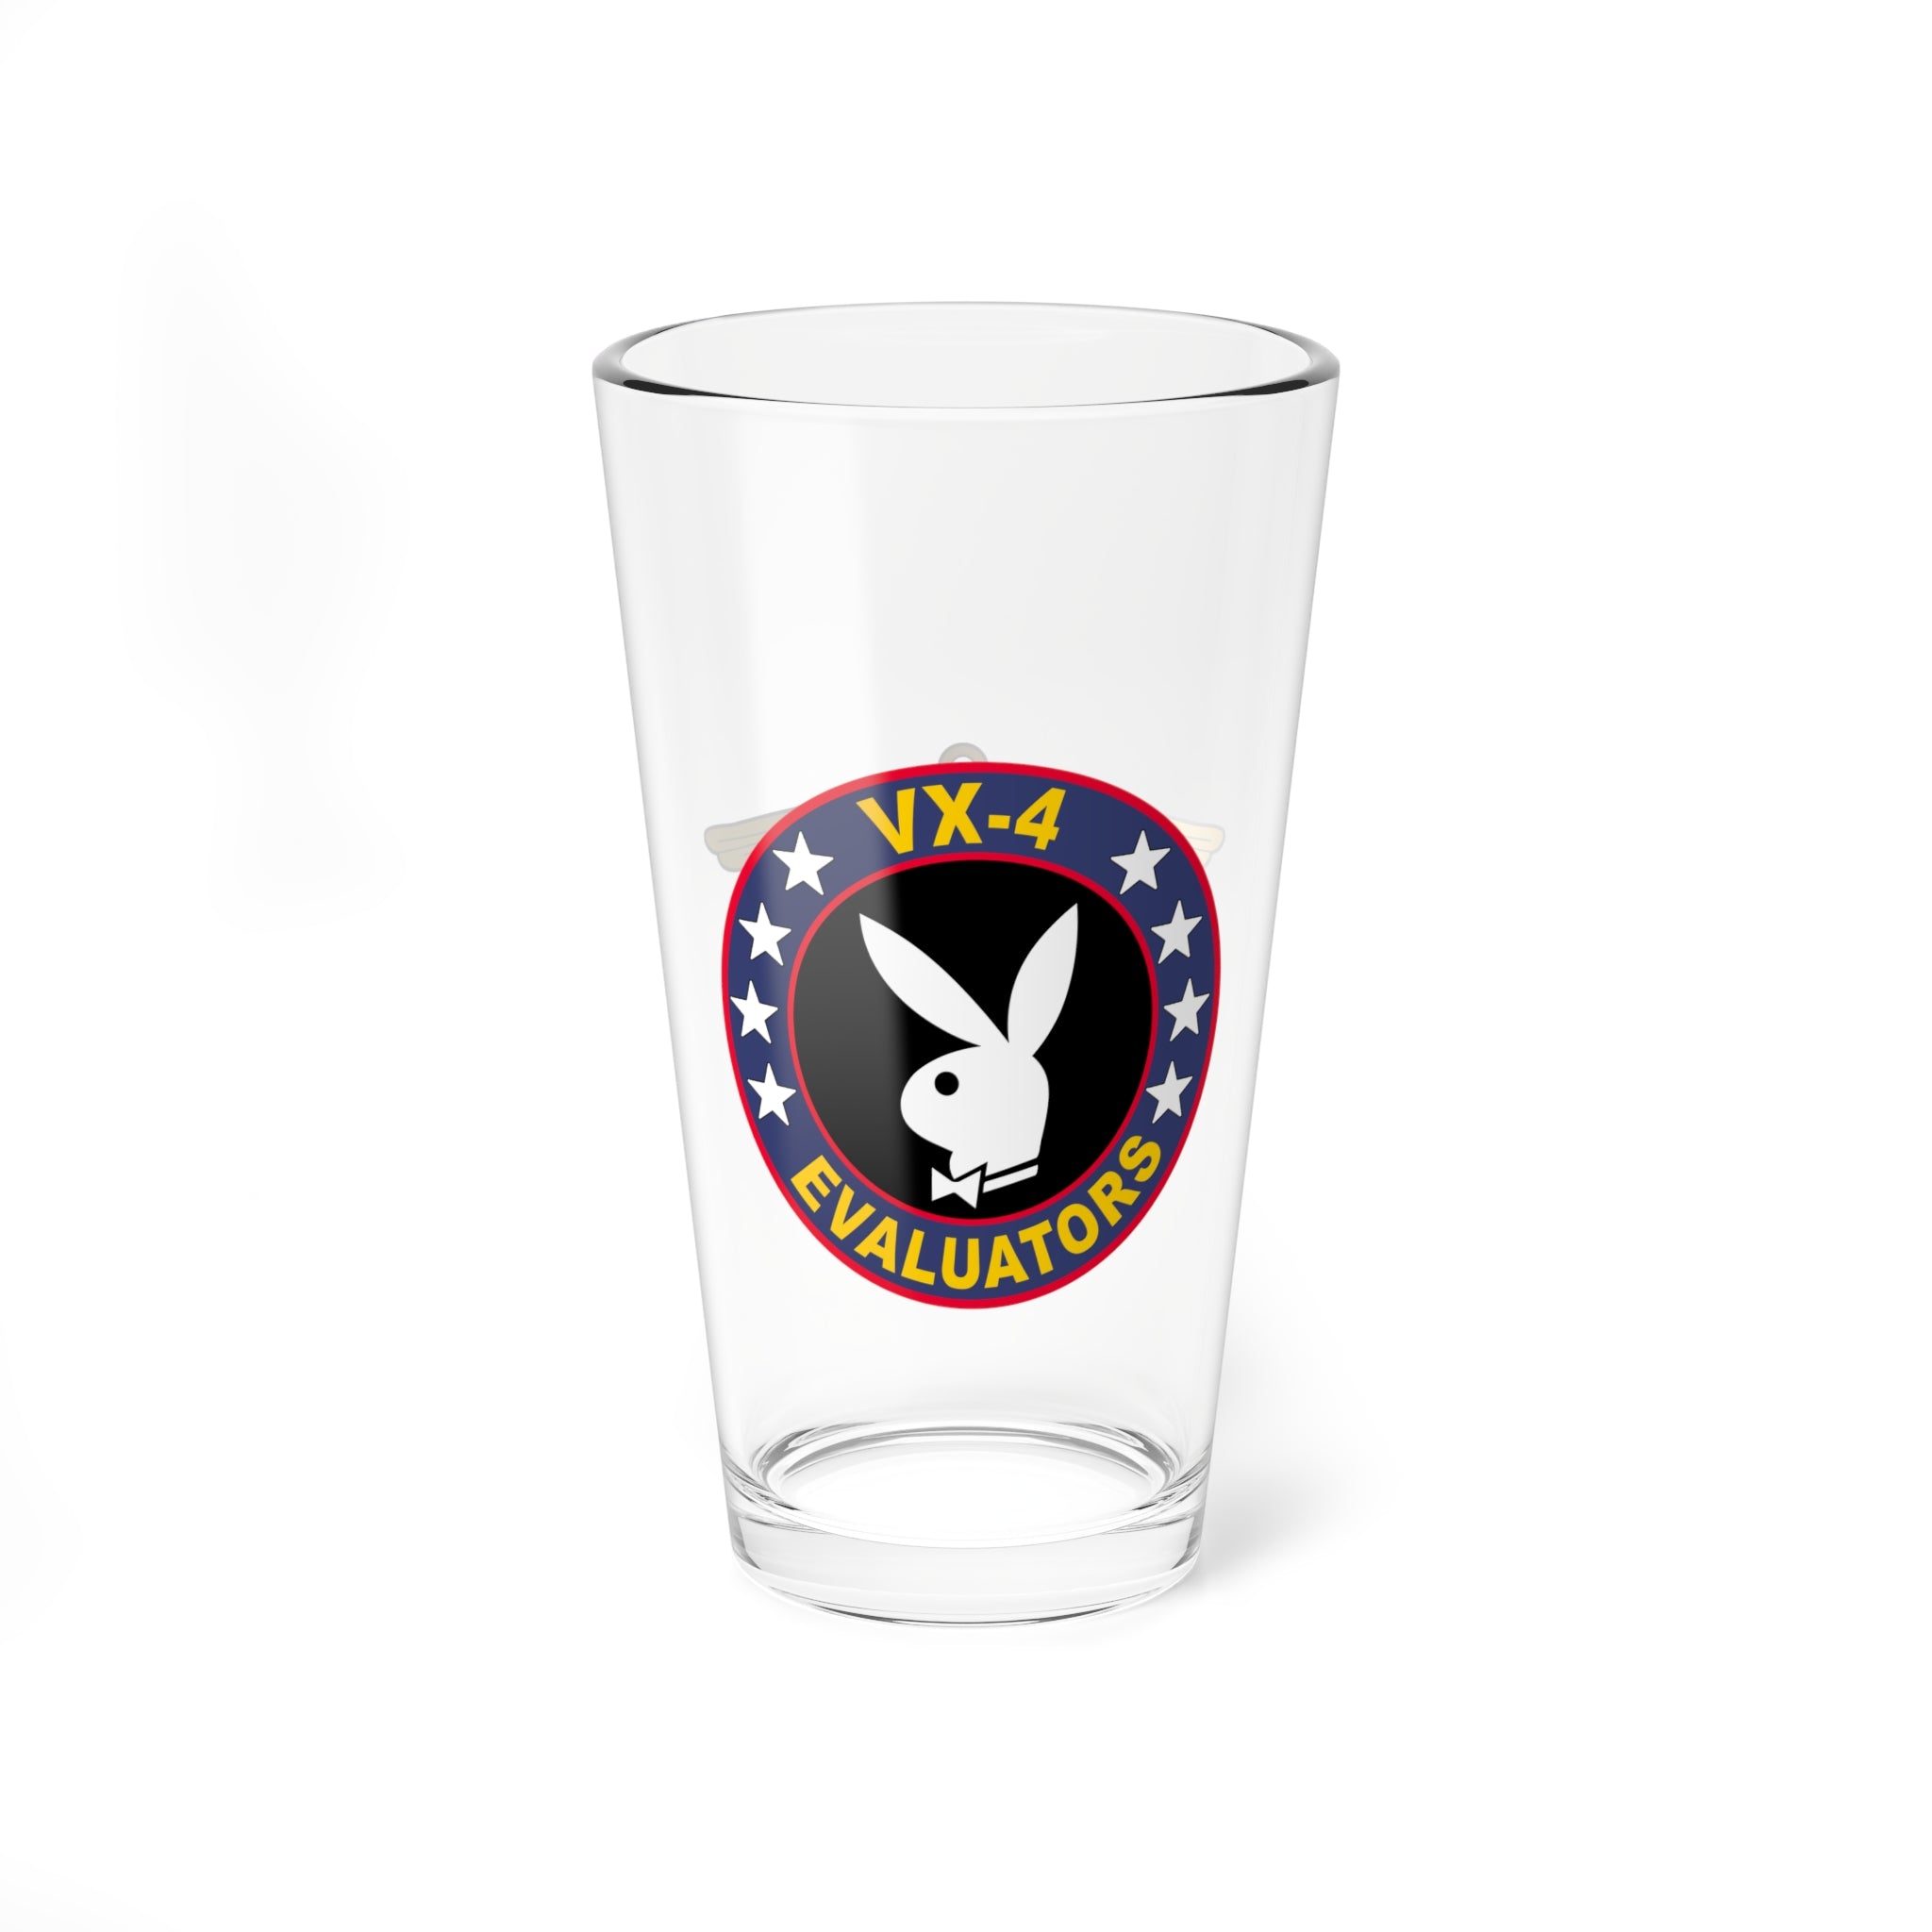 VX-4 "Evaluators" Aviator Pint Glass, Navy Strike Fighter Test and Evaluation Squadron